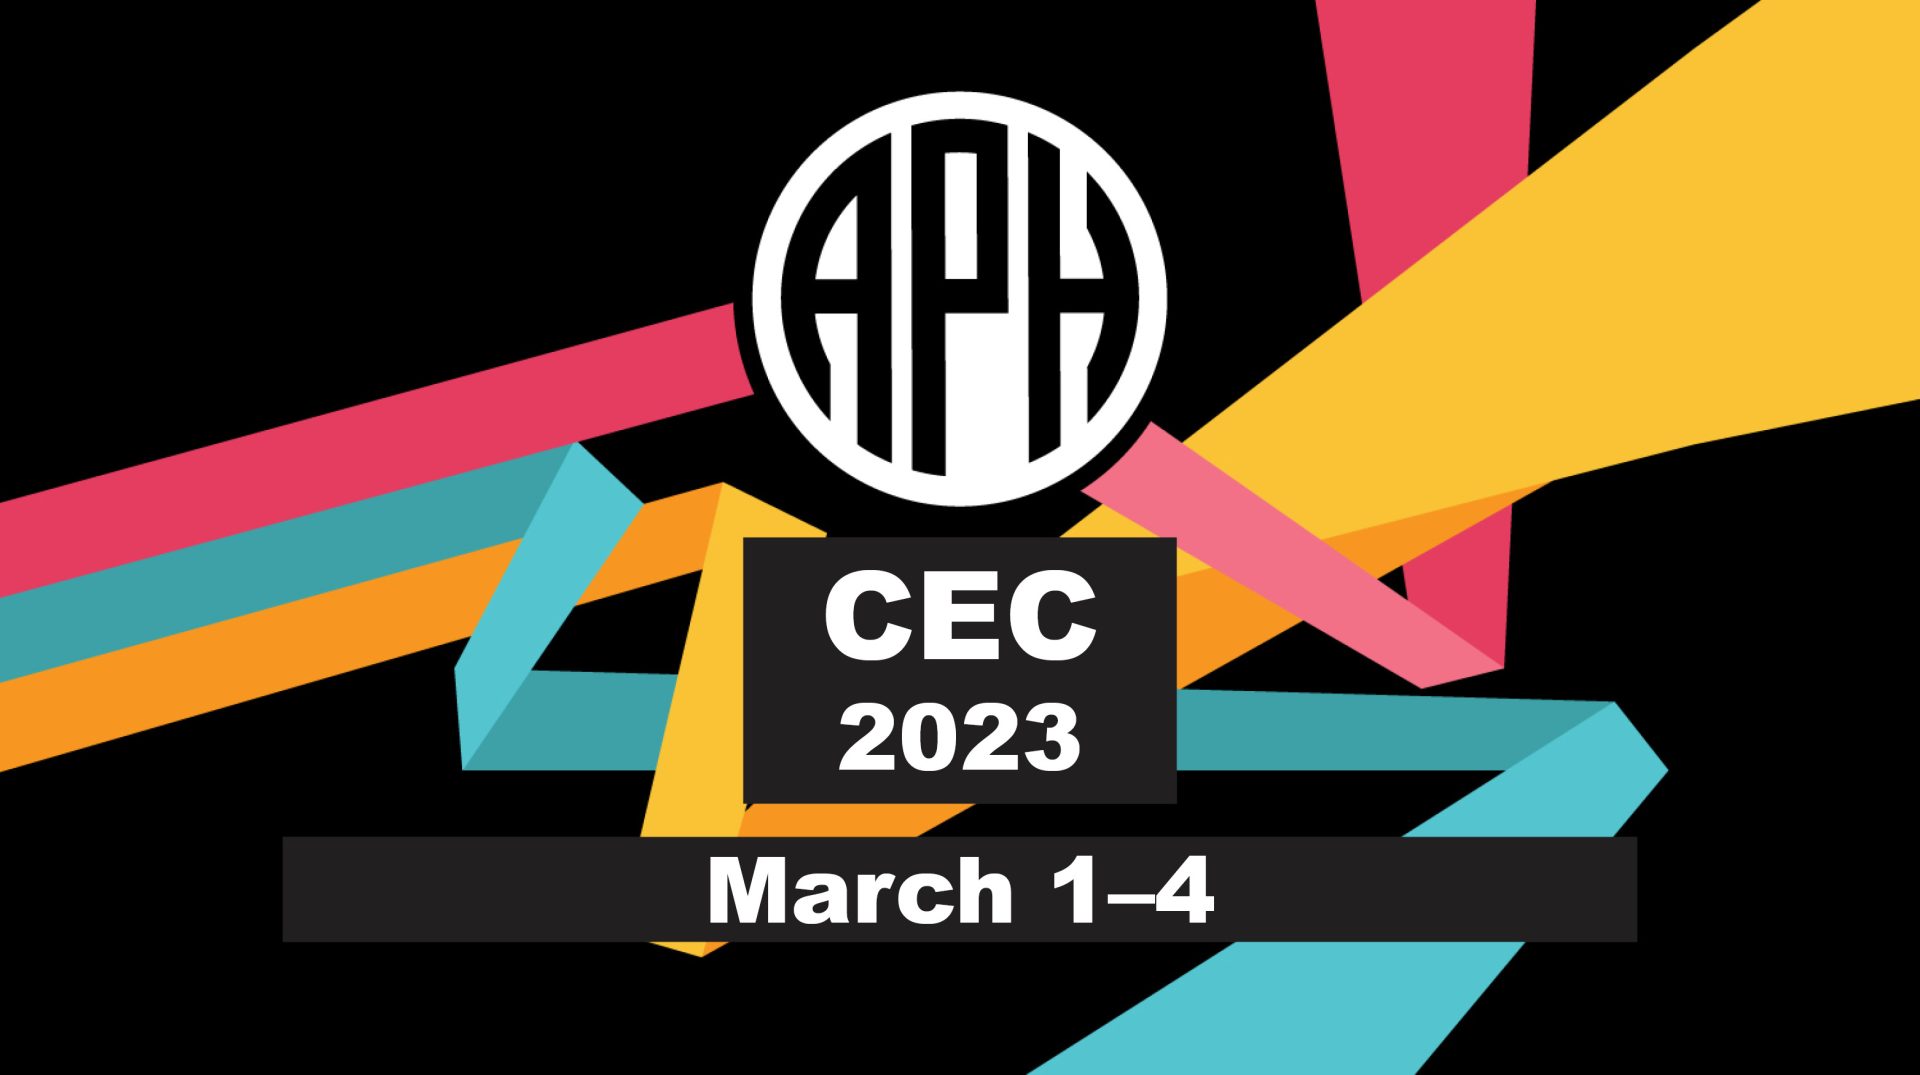 APH event banner. Three parallel bars in the APH brand colors of pomegranate, teal, and gold diverge and zigzag dynamically behind the APH logo. Text reads: CEC 2023, March 1 - 4.